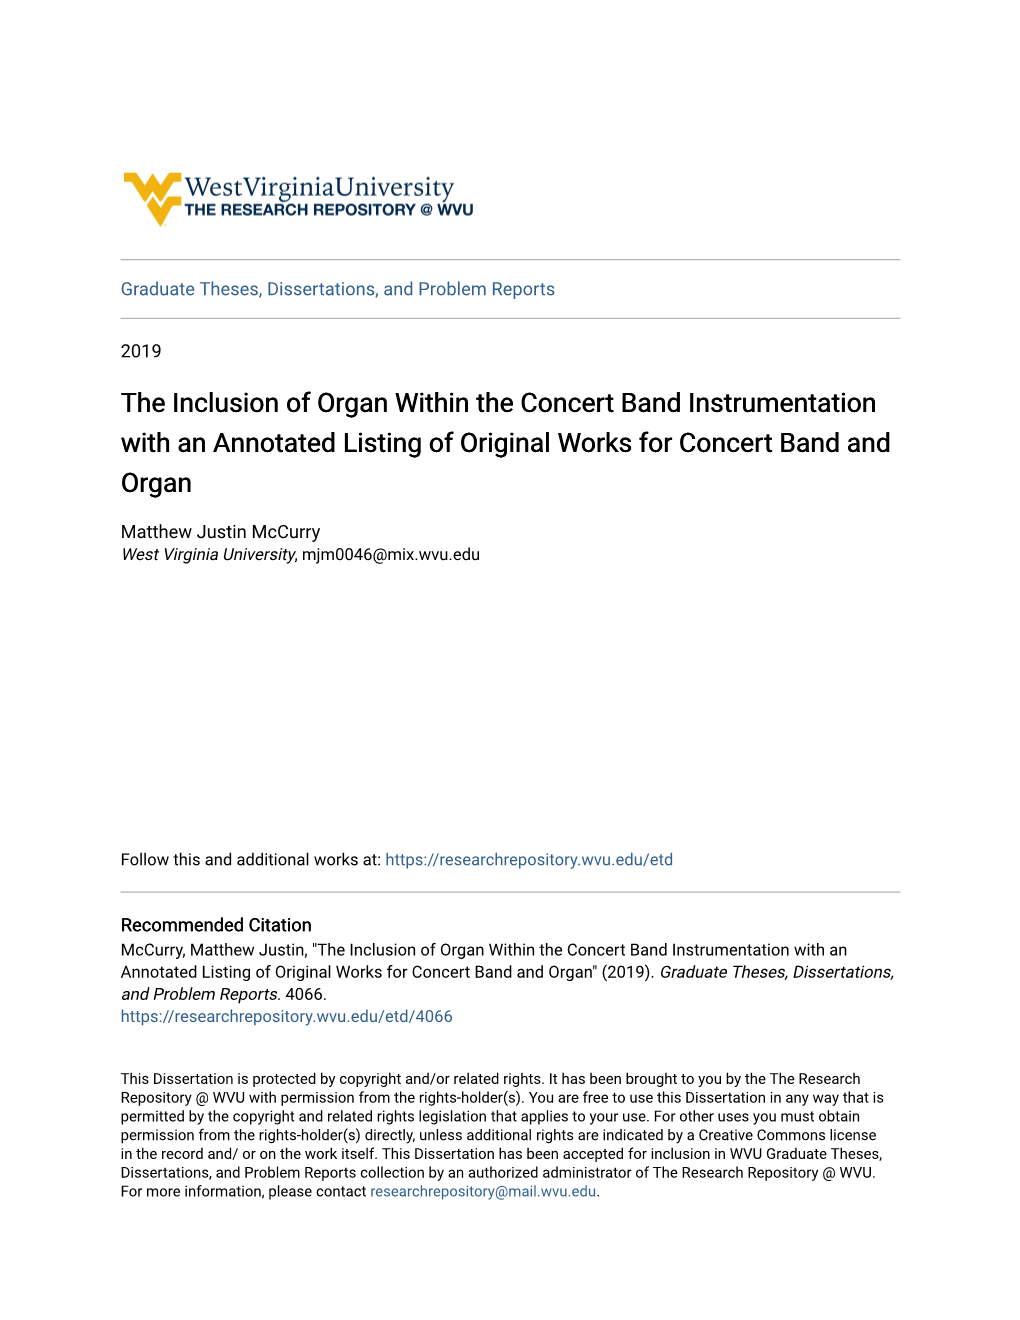 The Inclusion of Organ Within the Concert Band Instrumentation with an Annotated Listing of Original Works for Concert Band and Organ